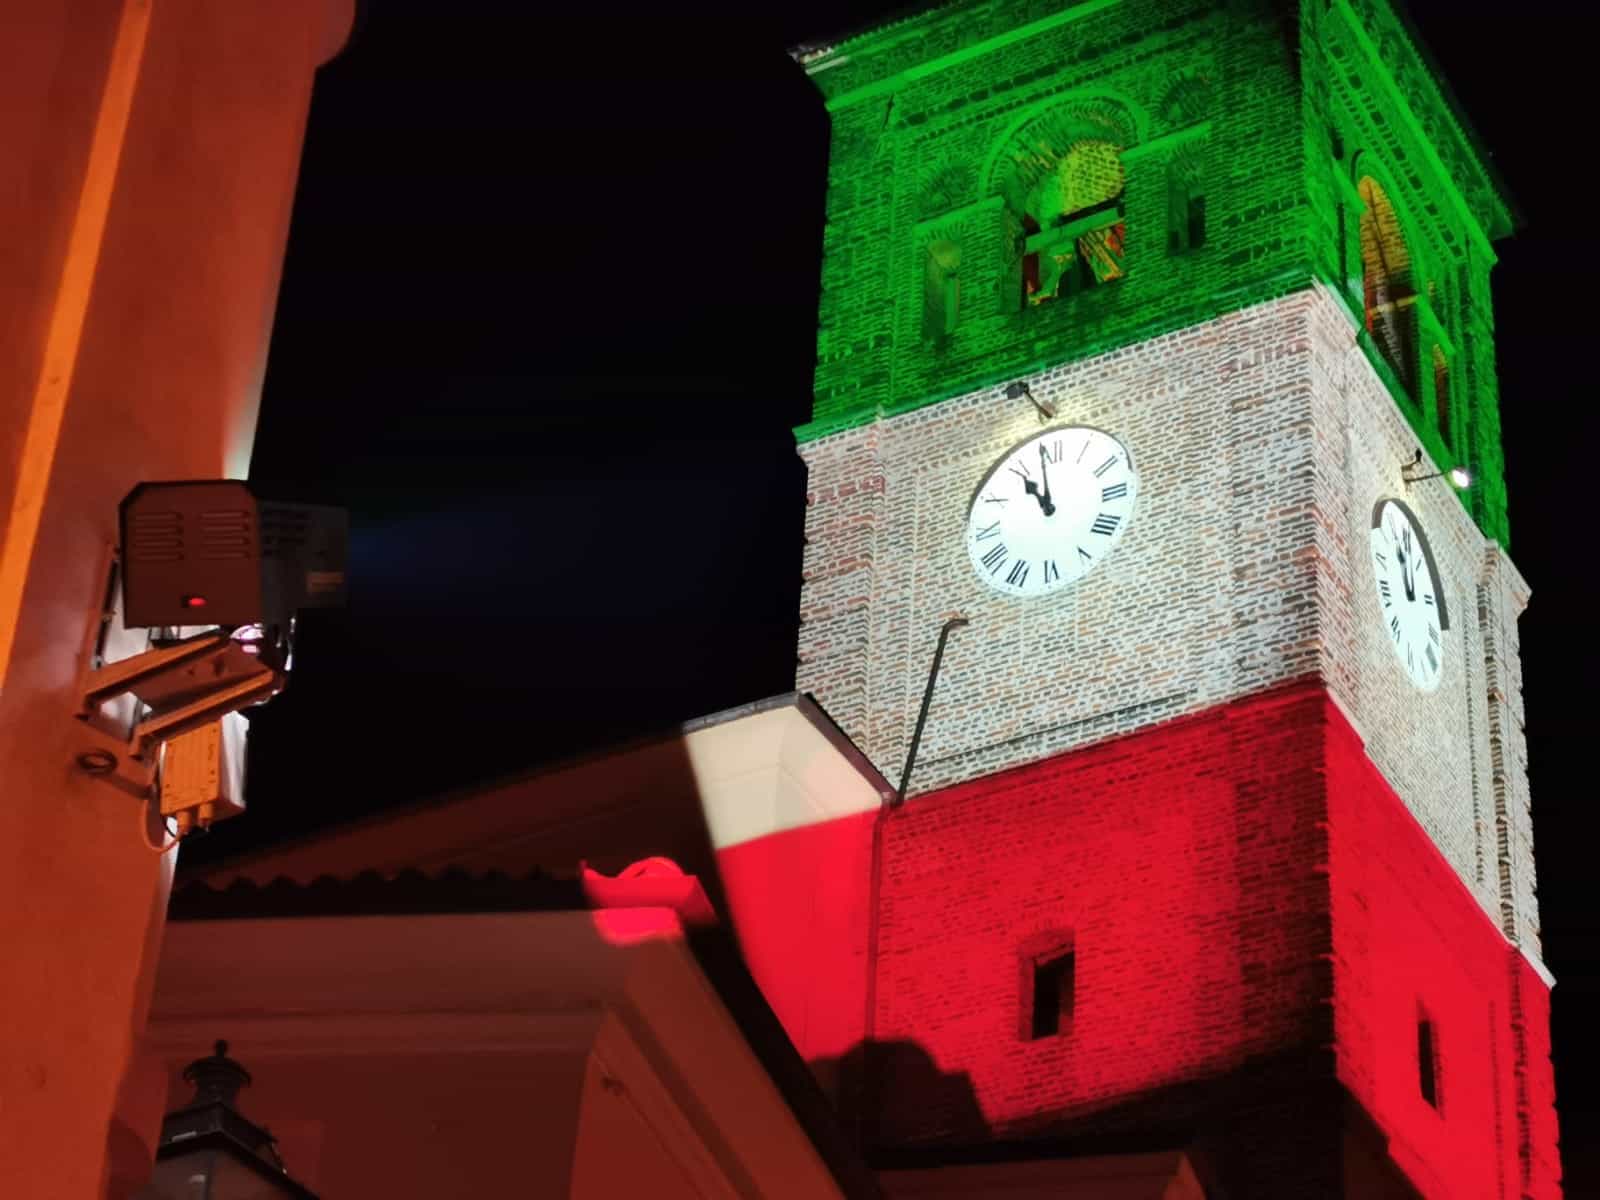 projection of the tricolor sommariva Perno